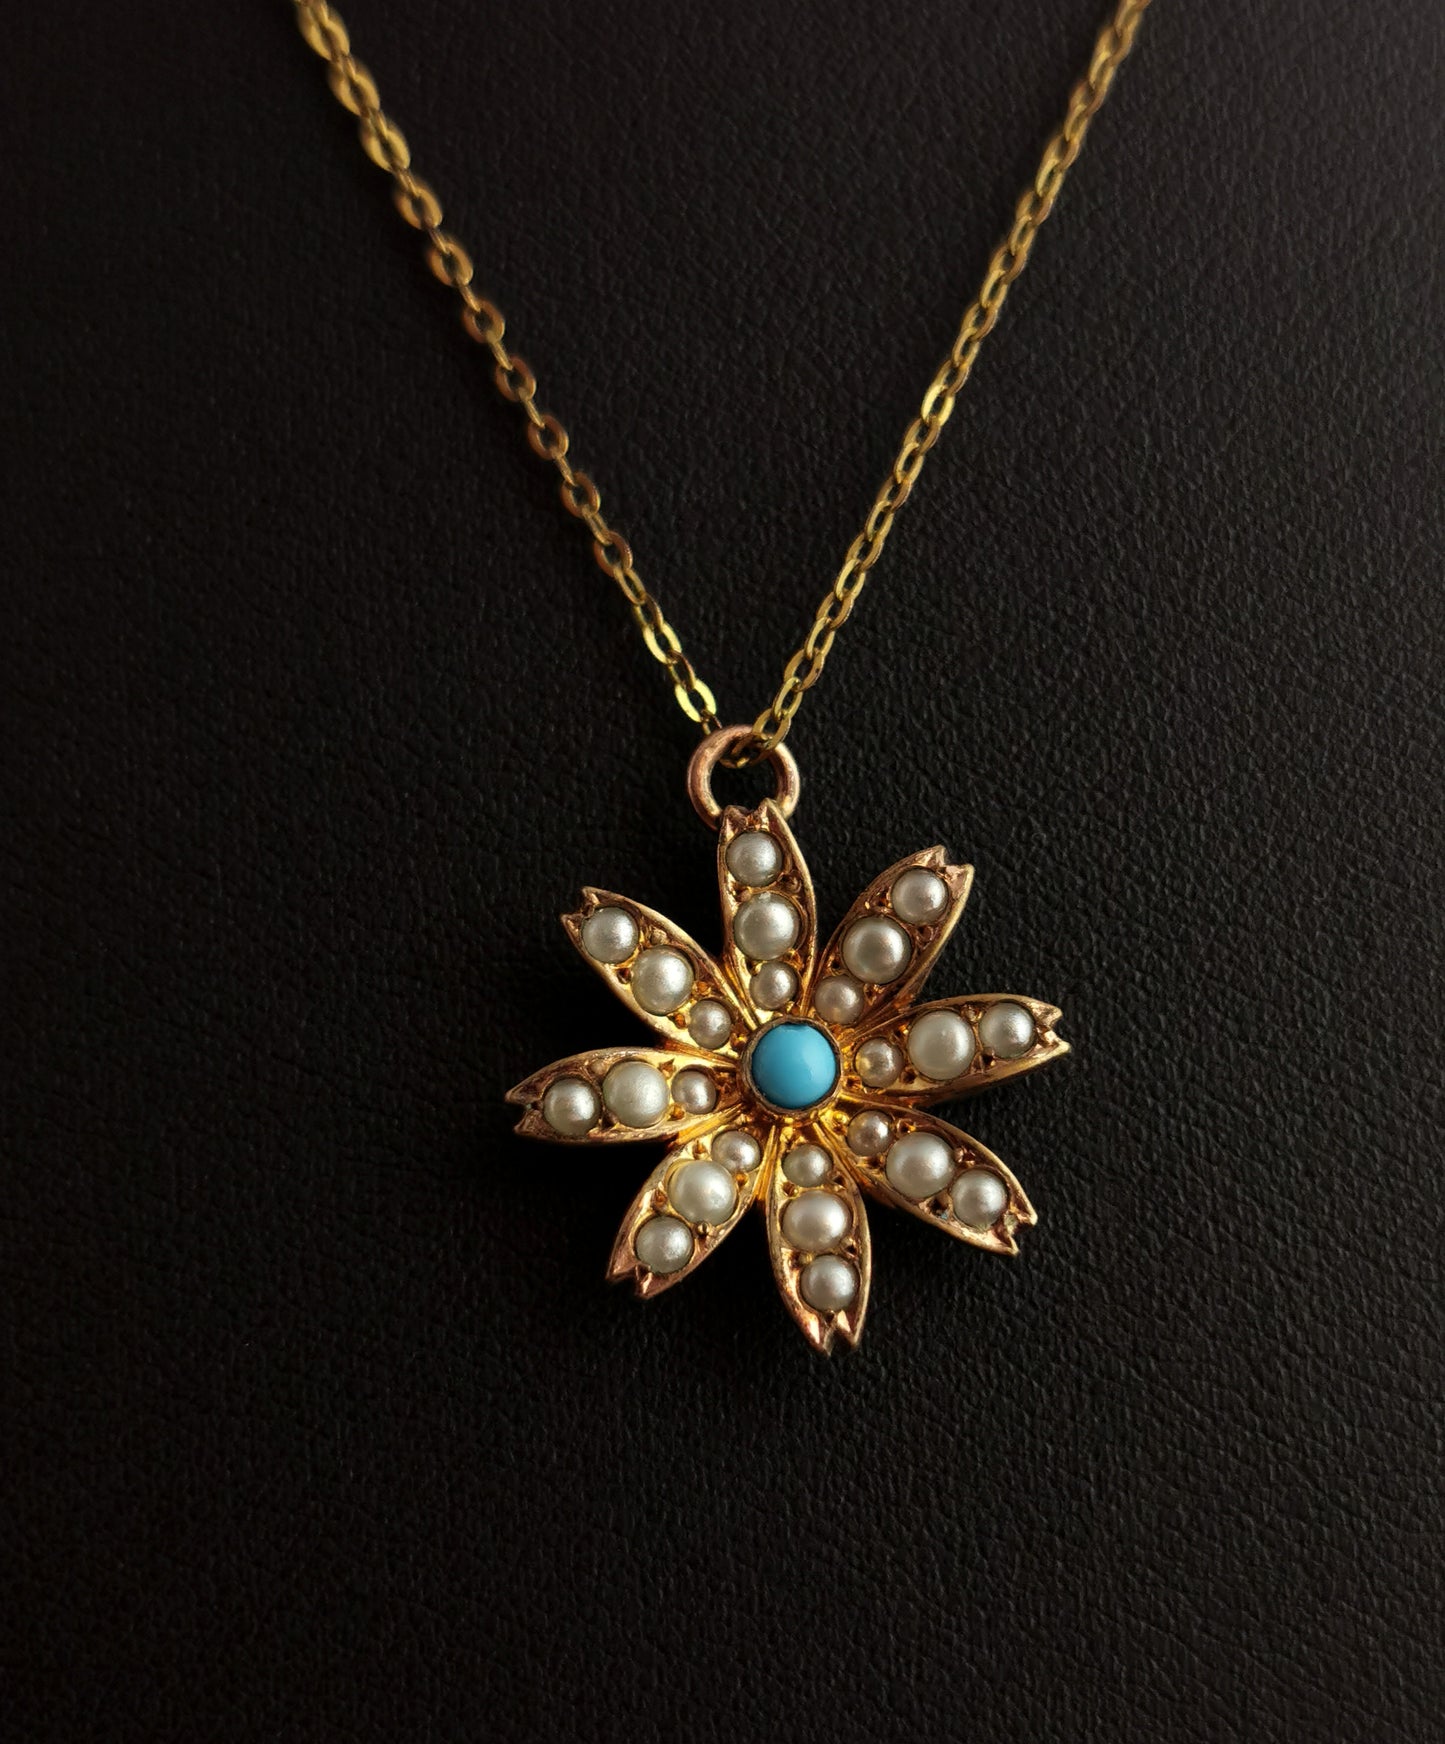 Antique flower pendant necklace, turquoise and seed pearl, Edwardian